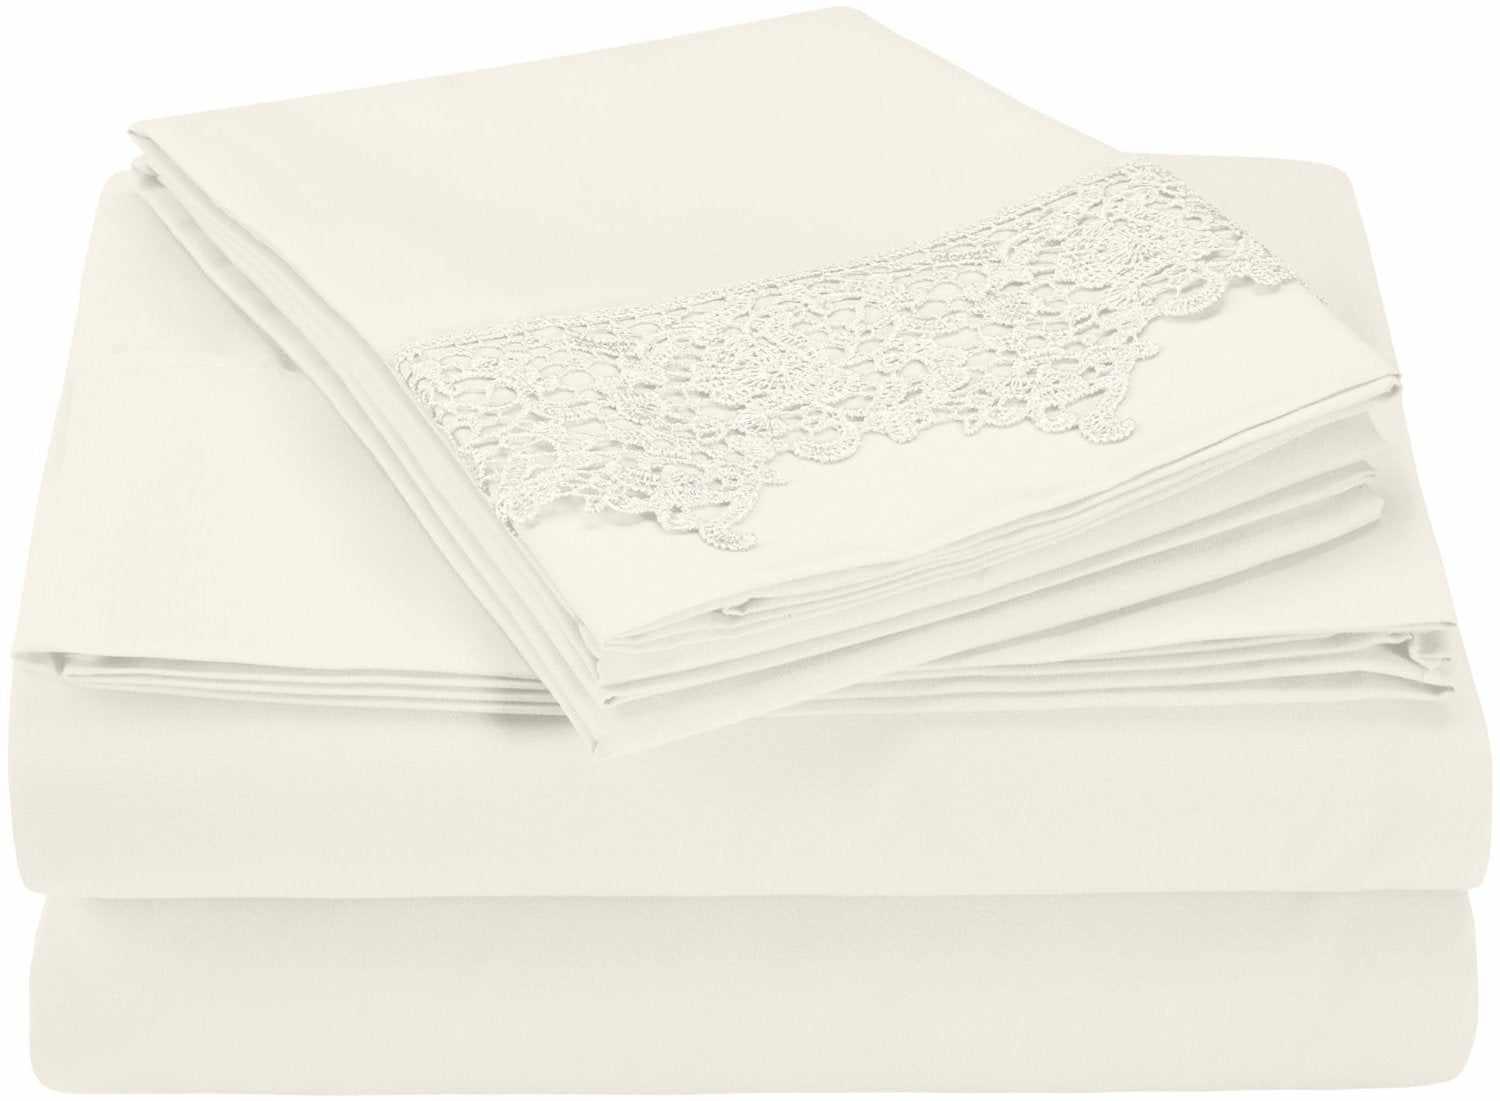 Superior Lace Overlay Solid Wrinkle Resistant Sheet Set - Tan